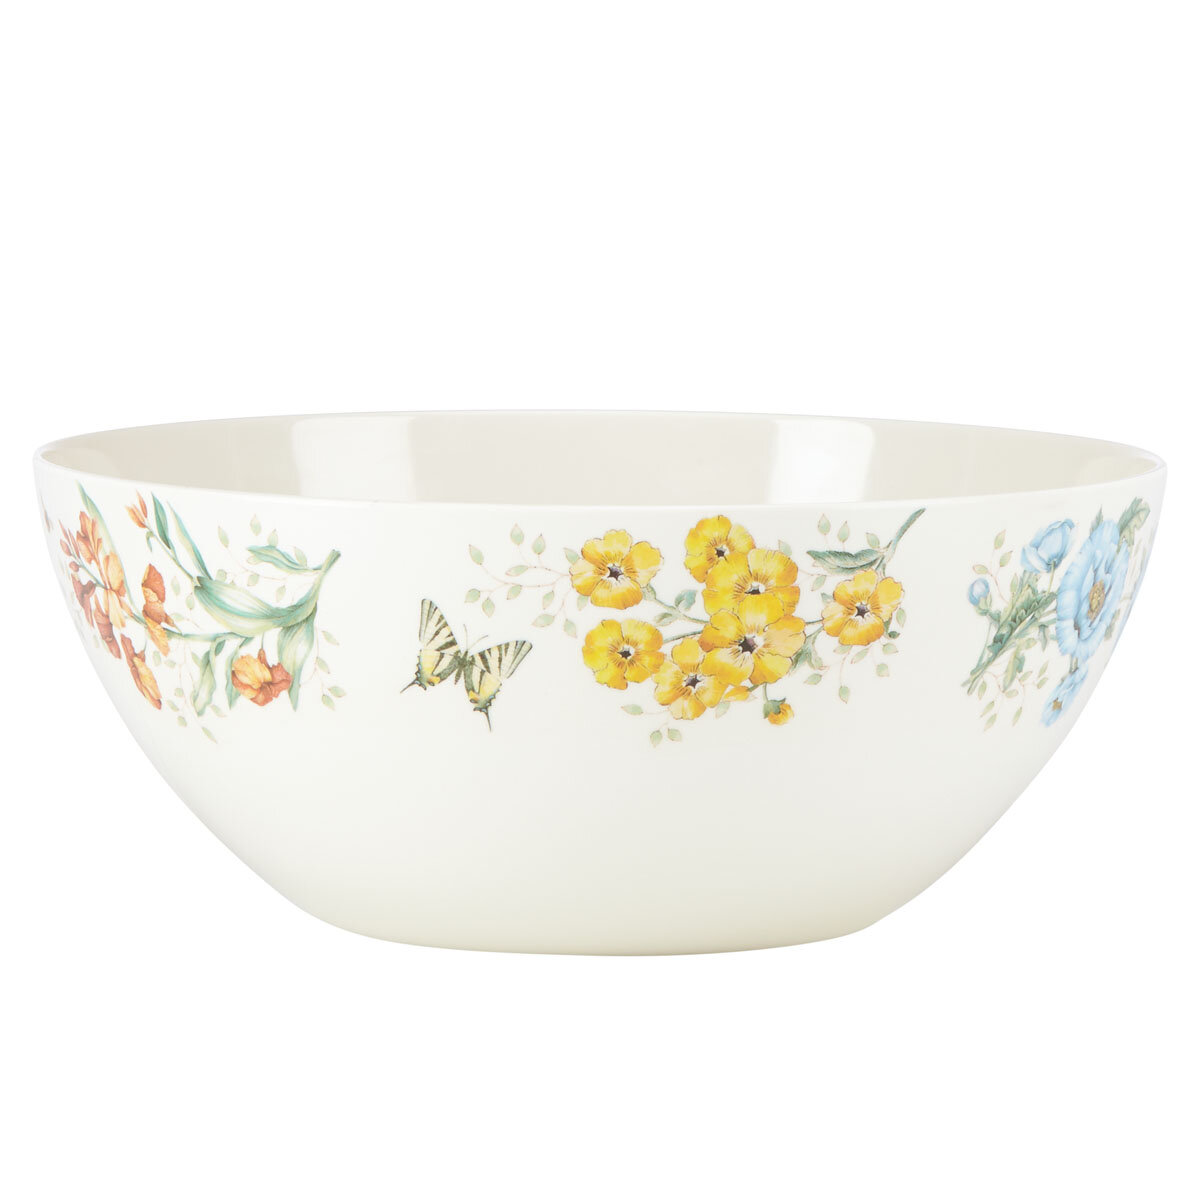  Lenox Butterfly Meadow Nesting Bowls, Set of 2 -: Serving Bowls:  Home & Kitchen